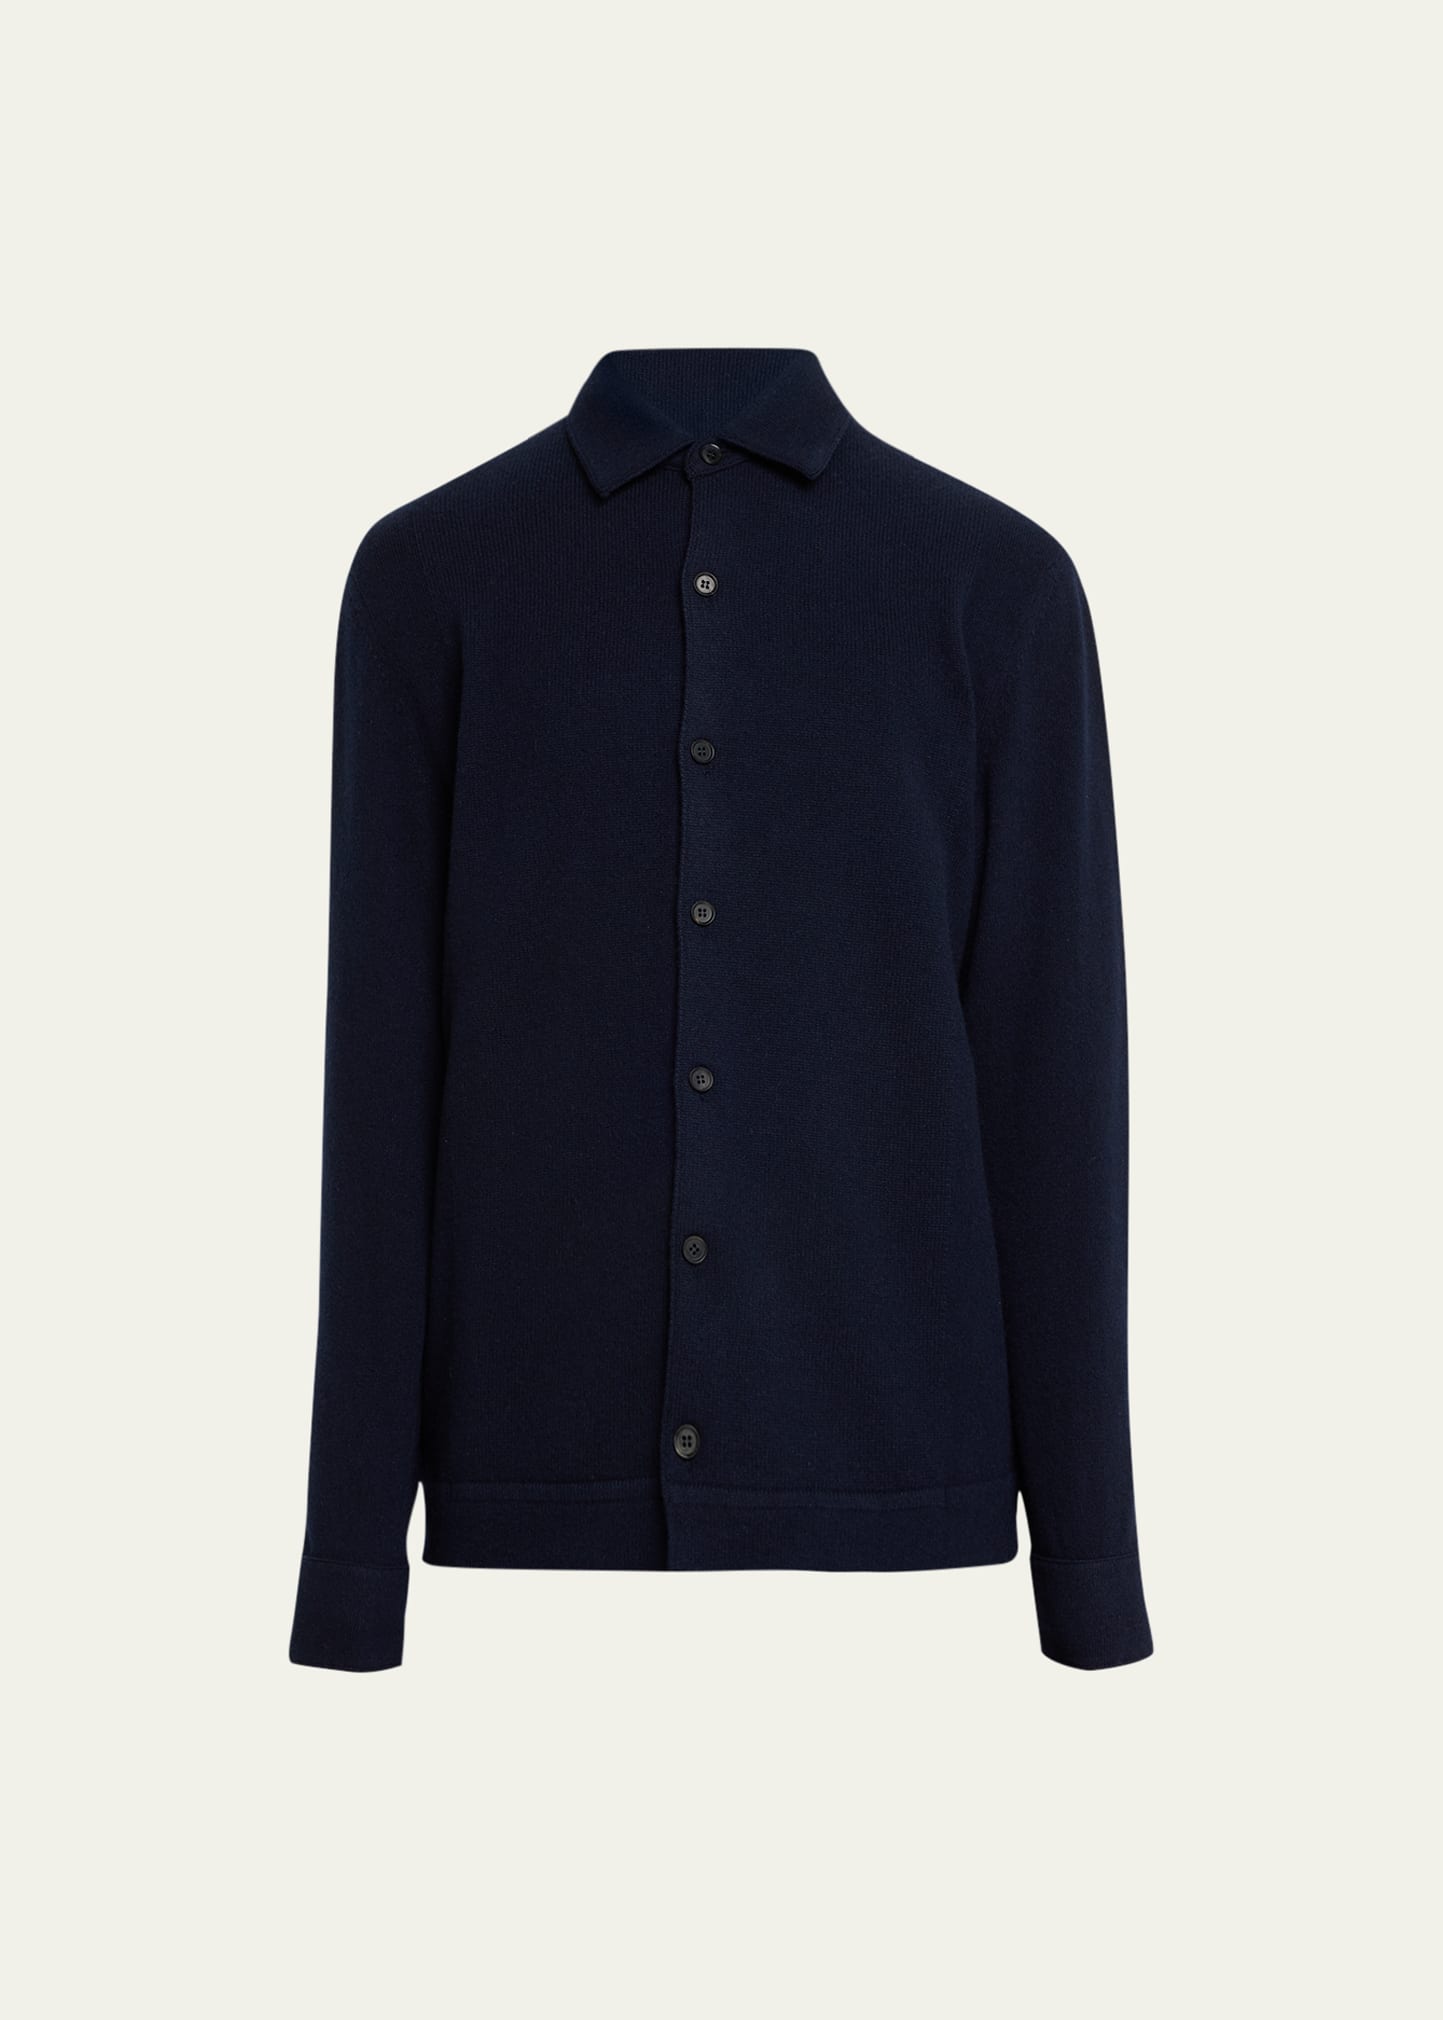 Zegna Men's Oasi Cashmere Knit Button-down Shirt In Nvy Sld